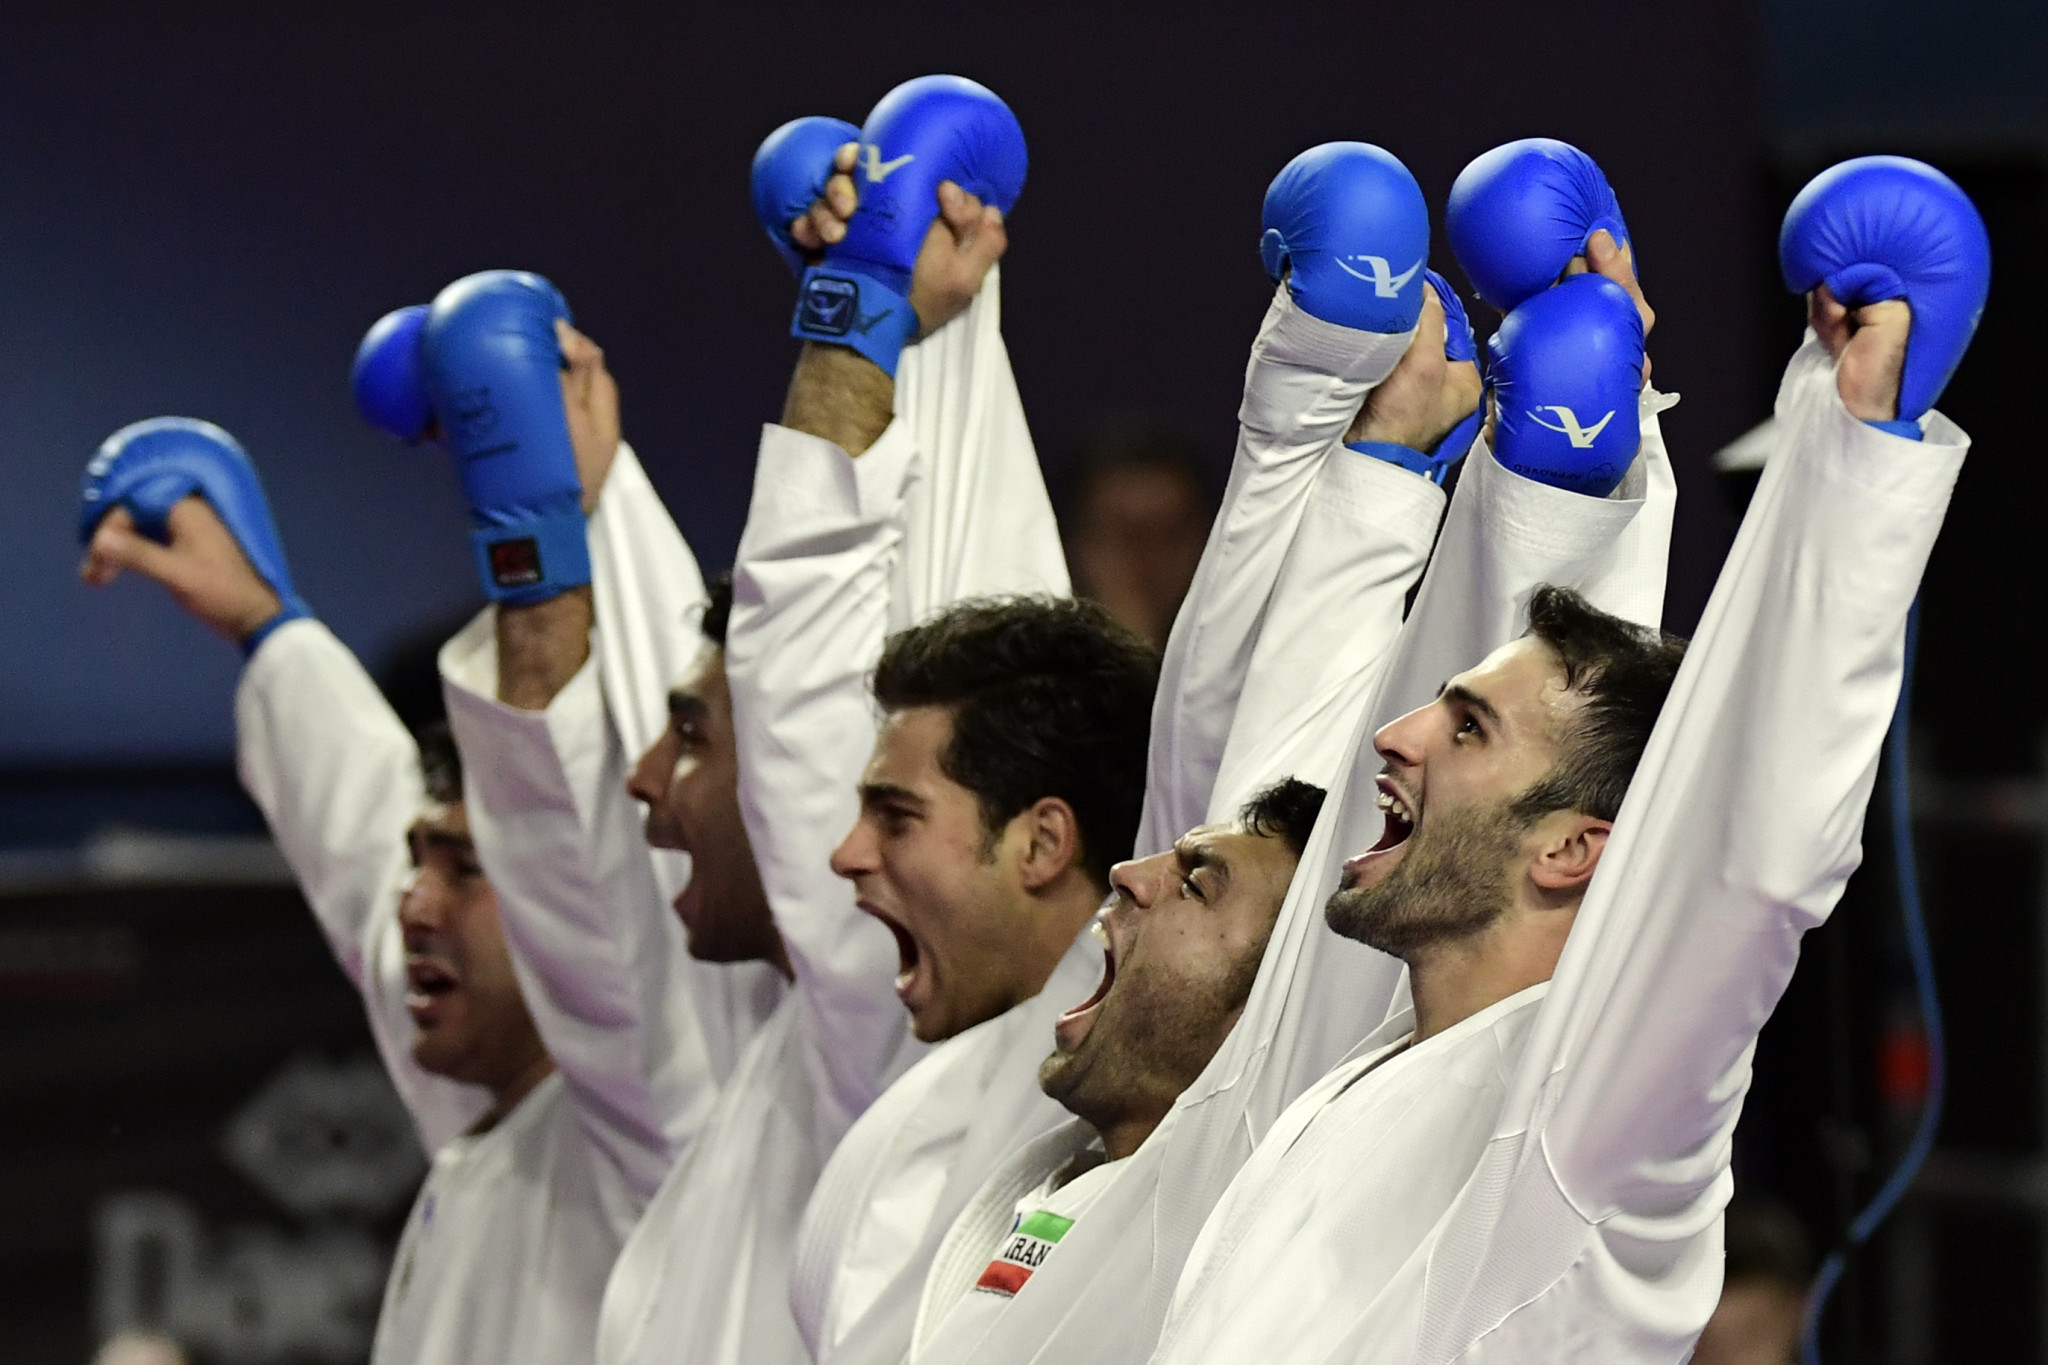 Iran fought back to beat Turkey in the men's team kumite final ©Getty Images